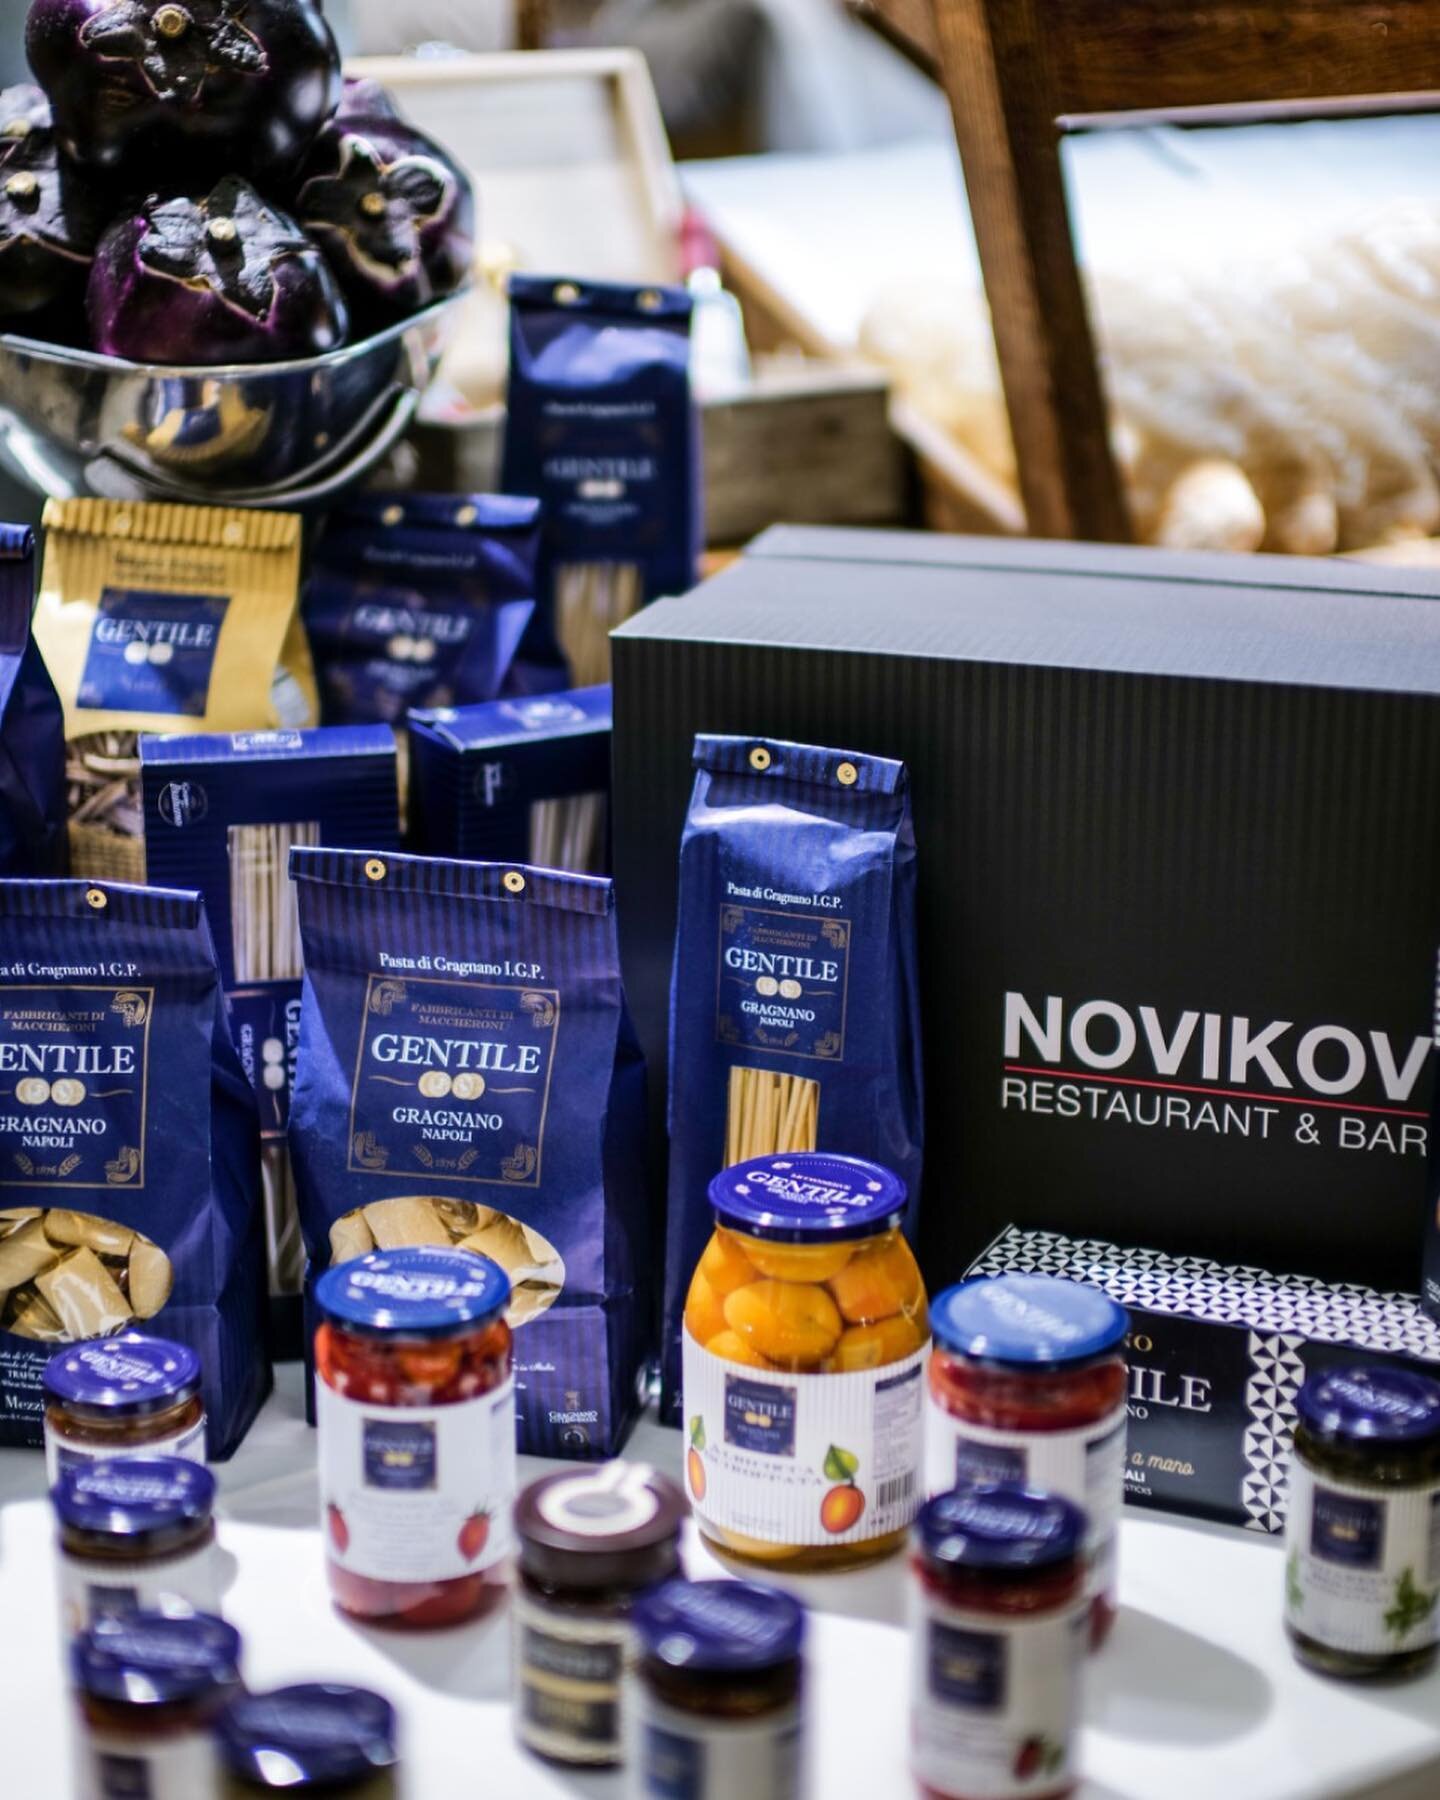 The perfect gift for any foodie: 
Novikov Hamper with selection of Finest Italian produce, picked by our chef. 

📸 @lisatse88
@novikovrestaurant 
 #Novikov #NovikovRestaurant #novikovlondon #NovikovItalianrestaurant #italianrestaurant  ##cooking #fo